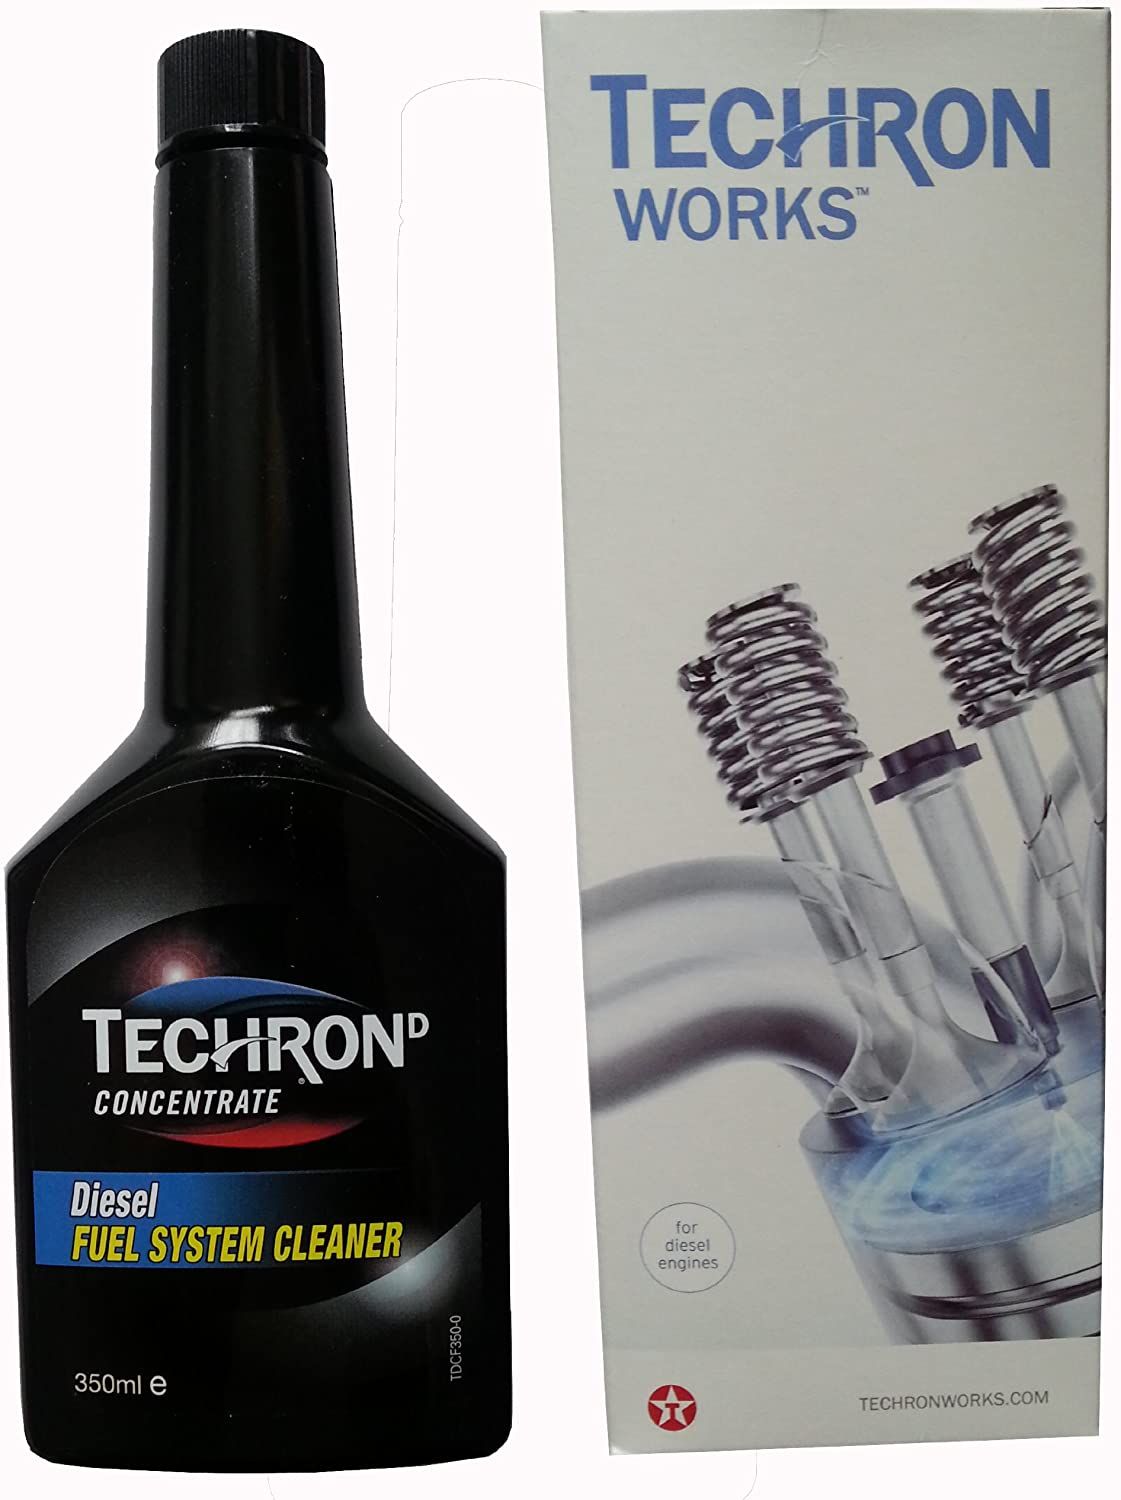 2020 The Best Fuel Injector Cleaners For Your Car